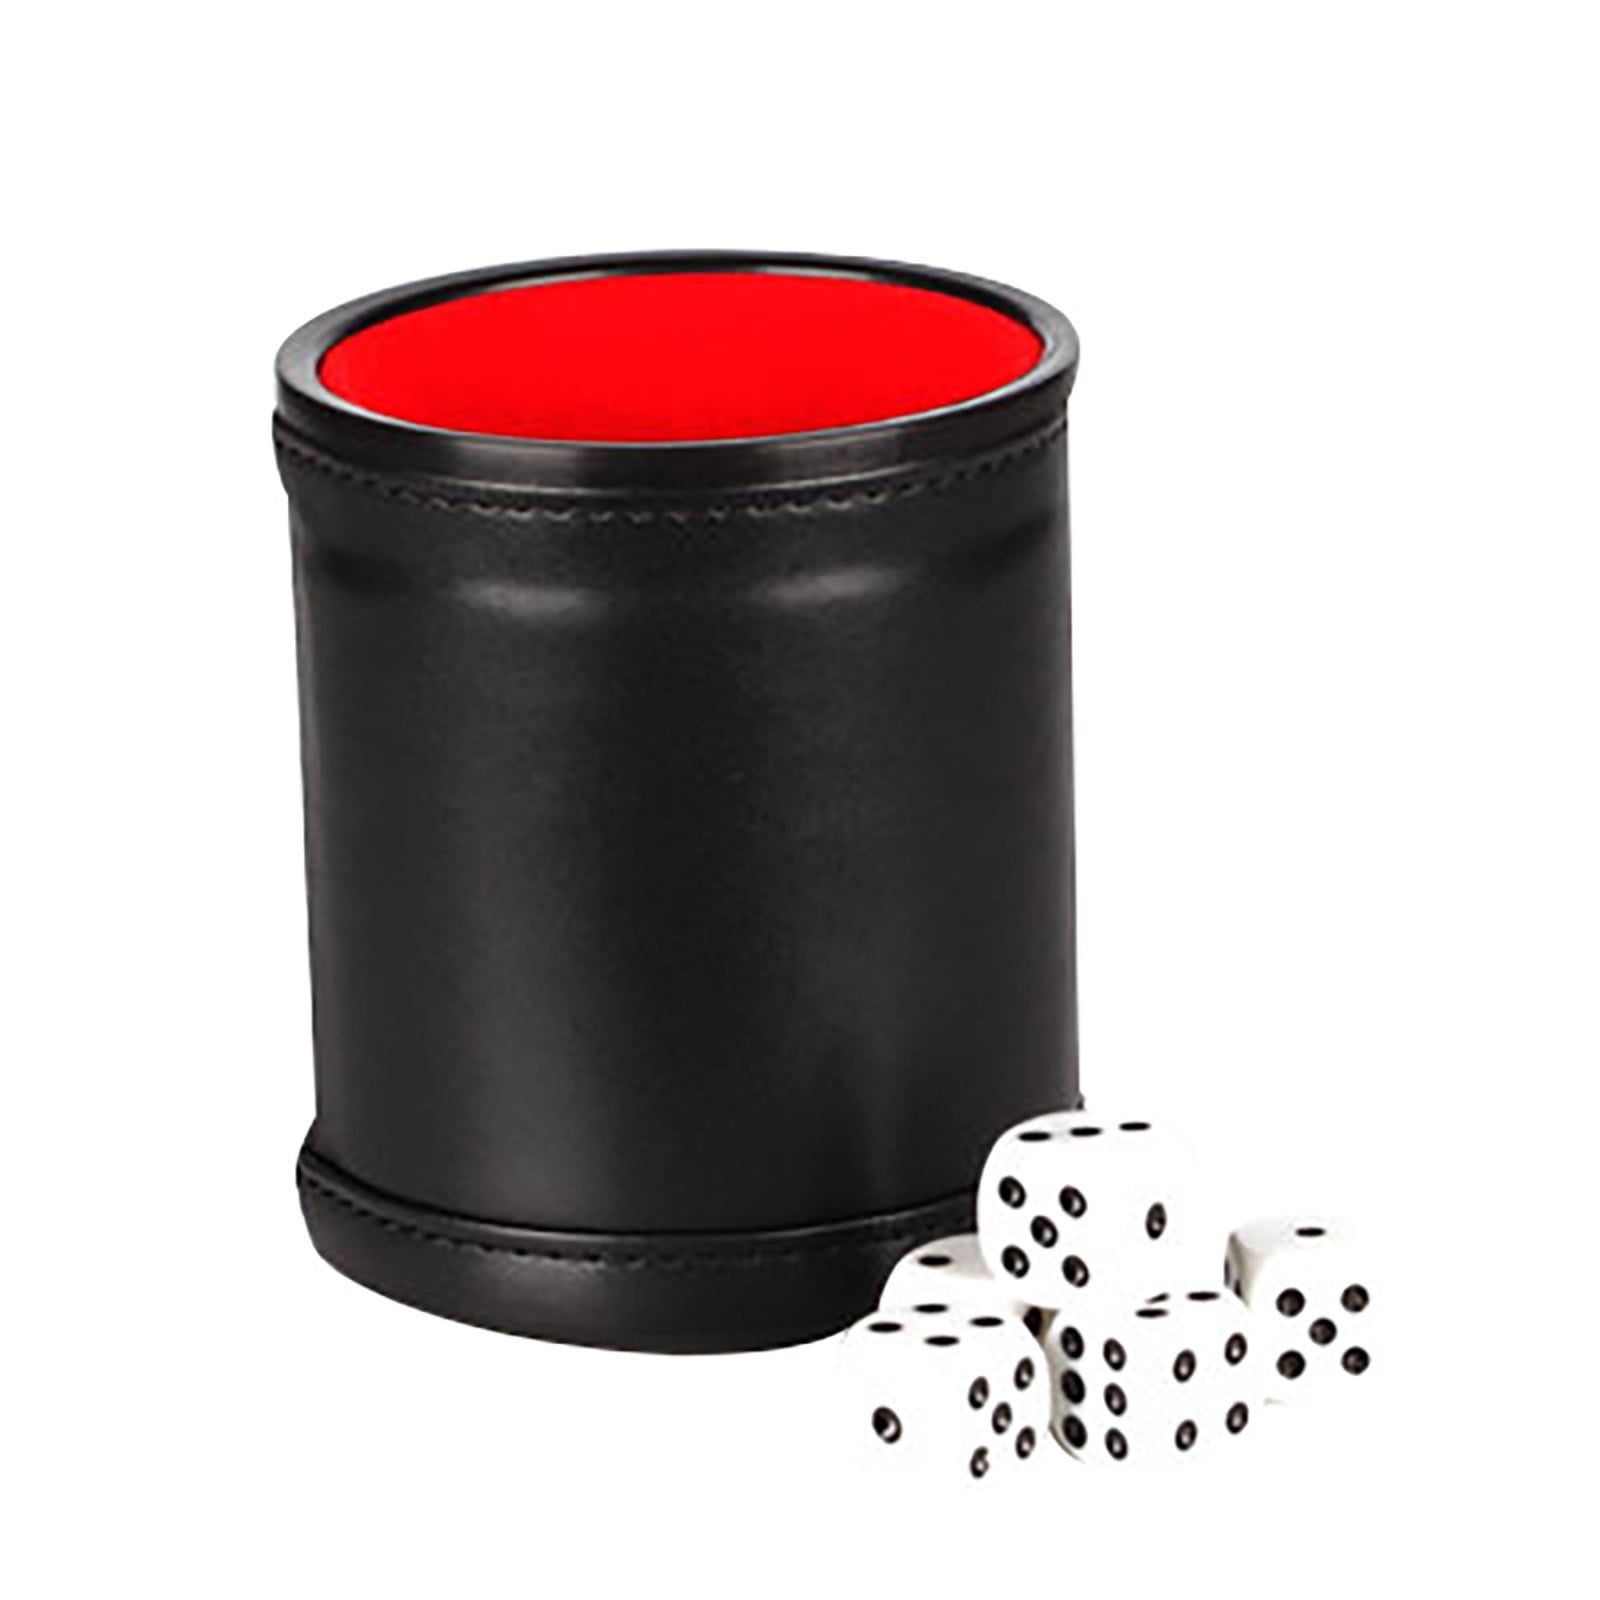 board games PU leather and red felt lining suitable for table games indoor entertainment Dice cup faux leather with lid contains 5 dice leather with cube set family parties bar entertainment.